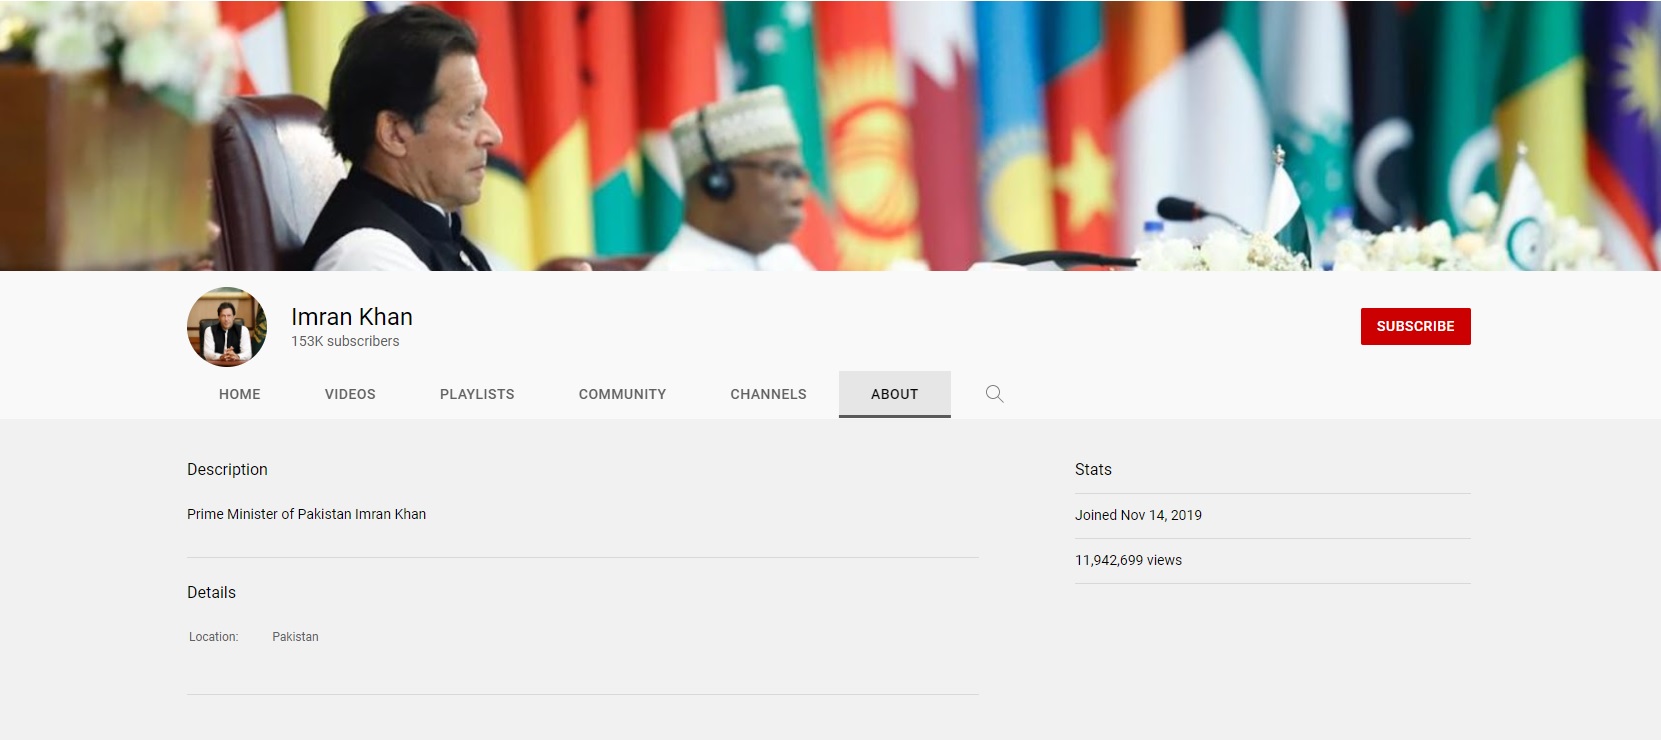 YouTube channel ‘Prime Minister’s Office’ renames to ‘Imran Khan’ inviting various questions